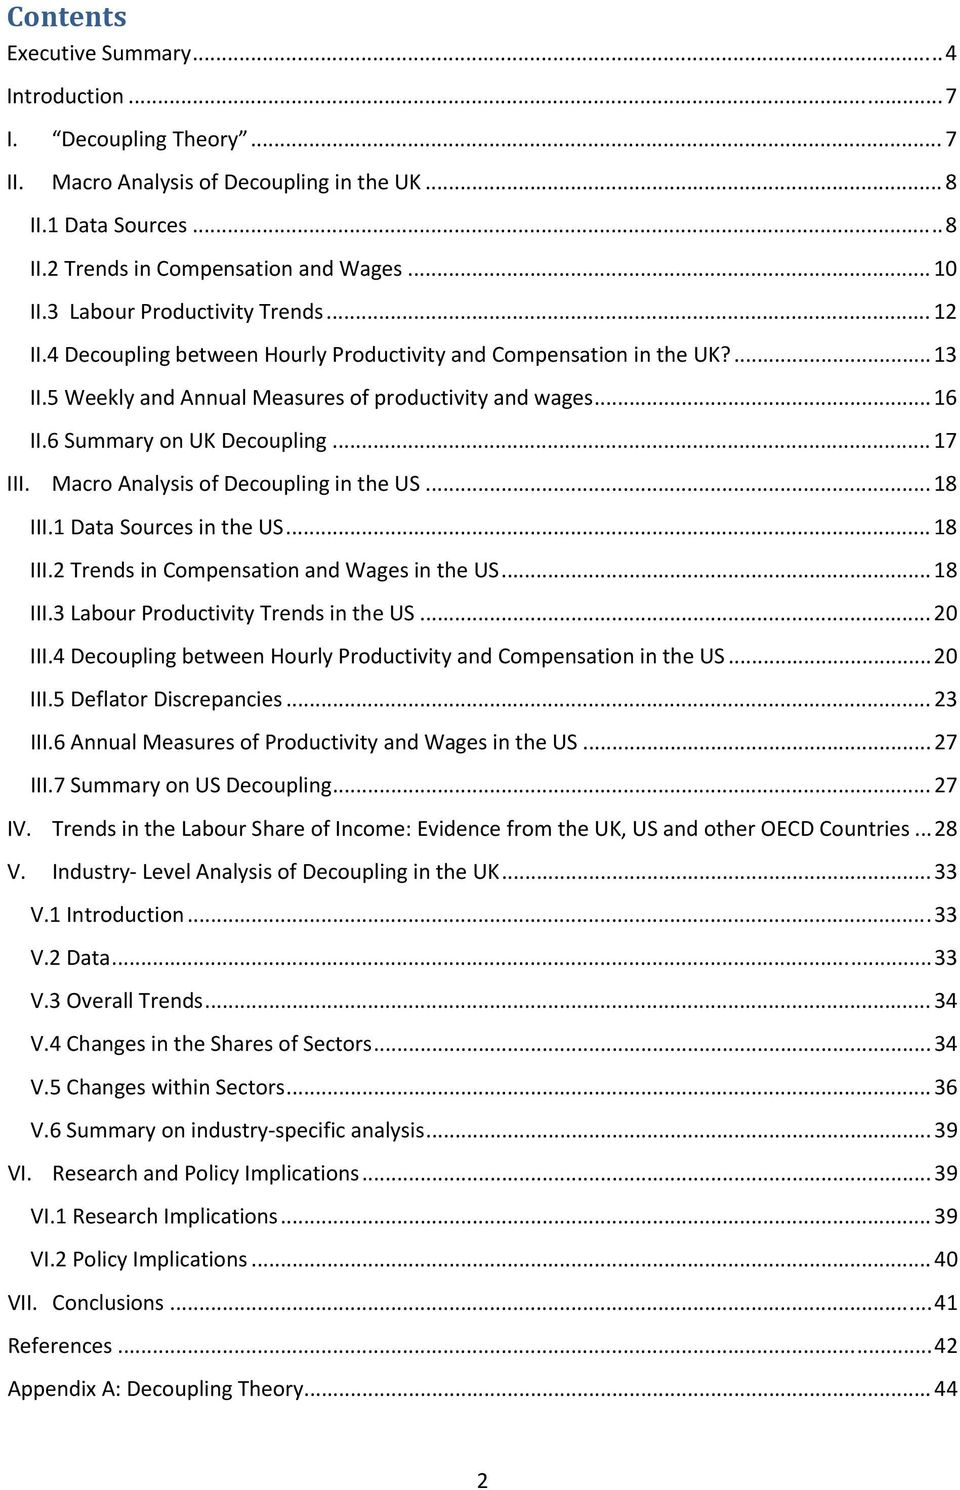 6 Summary on UK Decoupling... 17 III. Macro Analysis of Decoupling in the US... 18 III.1 Data Sources in the US... 18 III.2 Trends in Compensation and Wages in the US... 18 III.3 Labour Productivity Trends in the US.